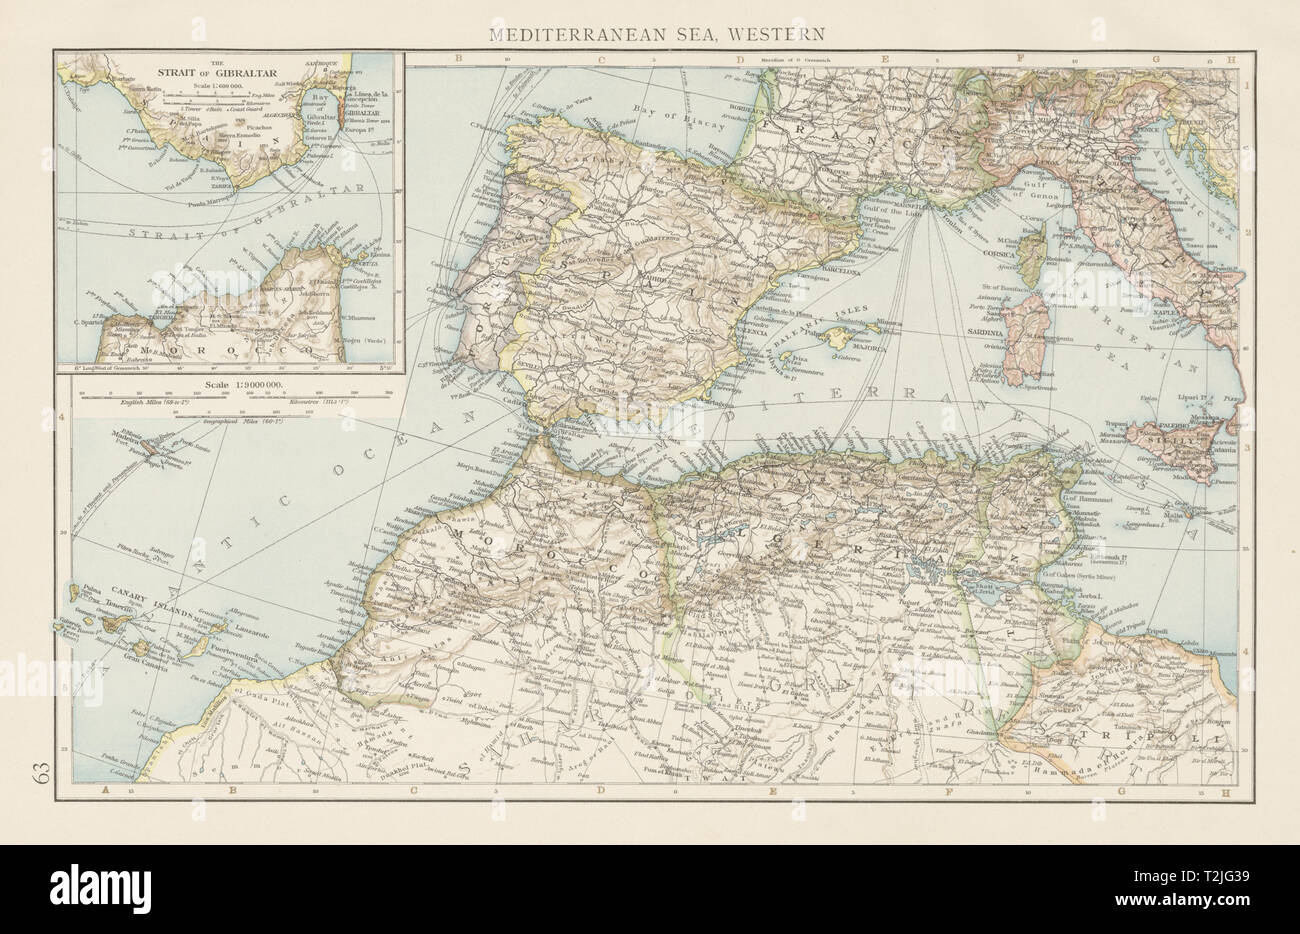 Western Mediterranean sea. Strait of Gibraltar. Telegraph cables. TIMES 1900 map Stock Photo